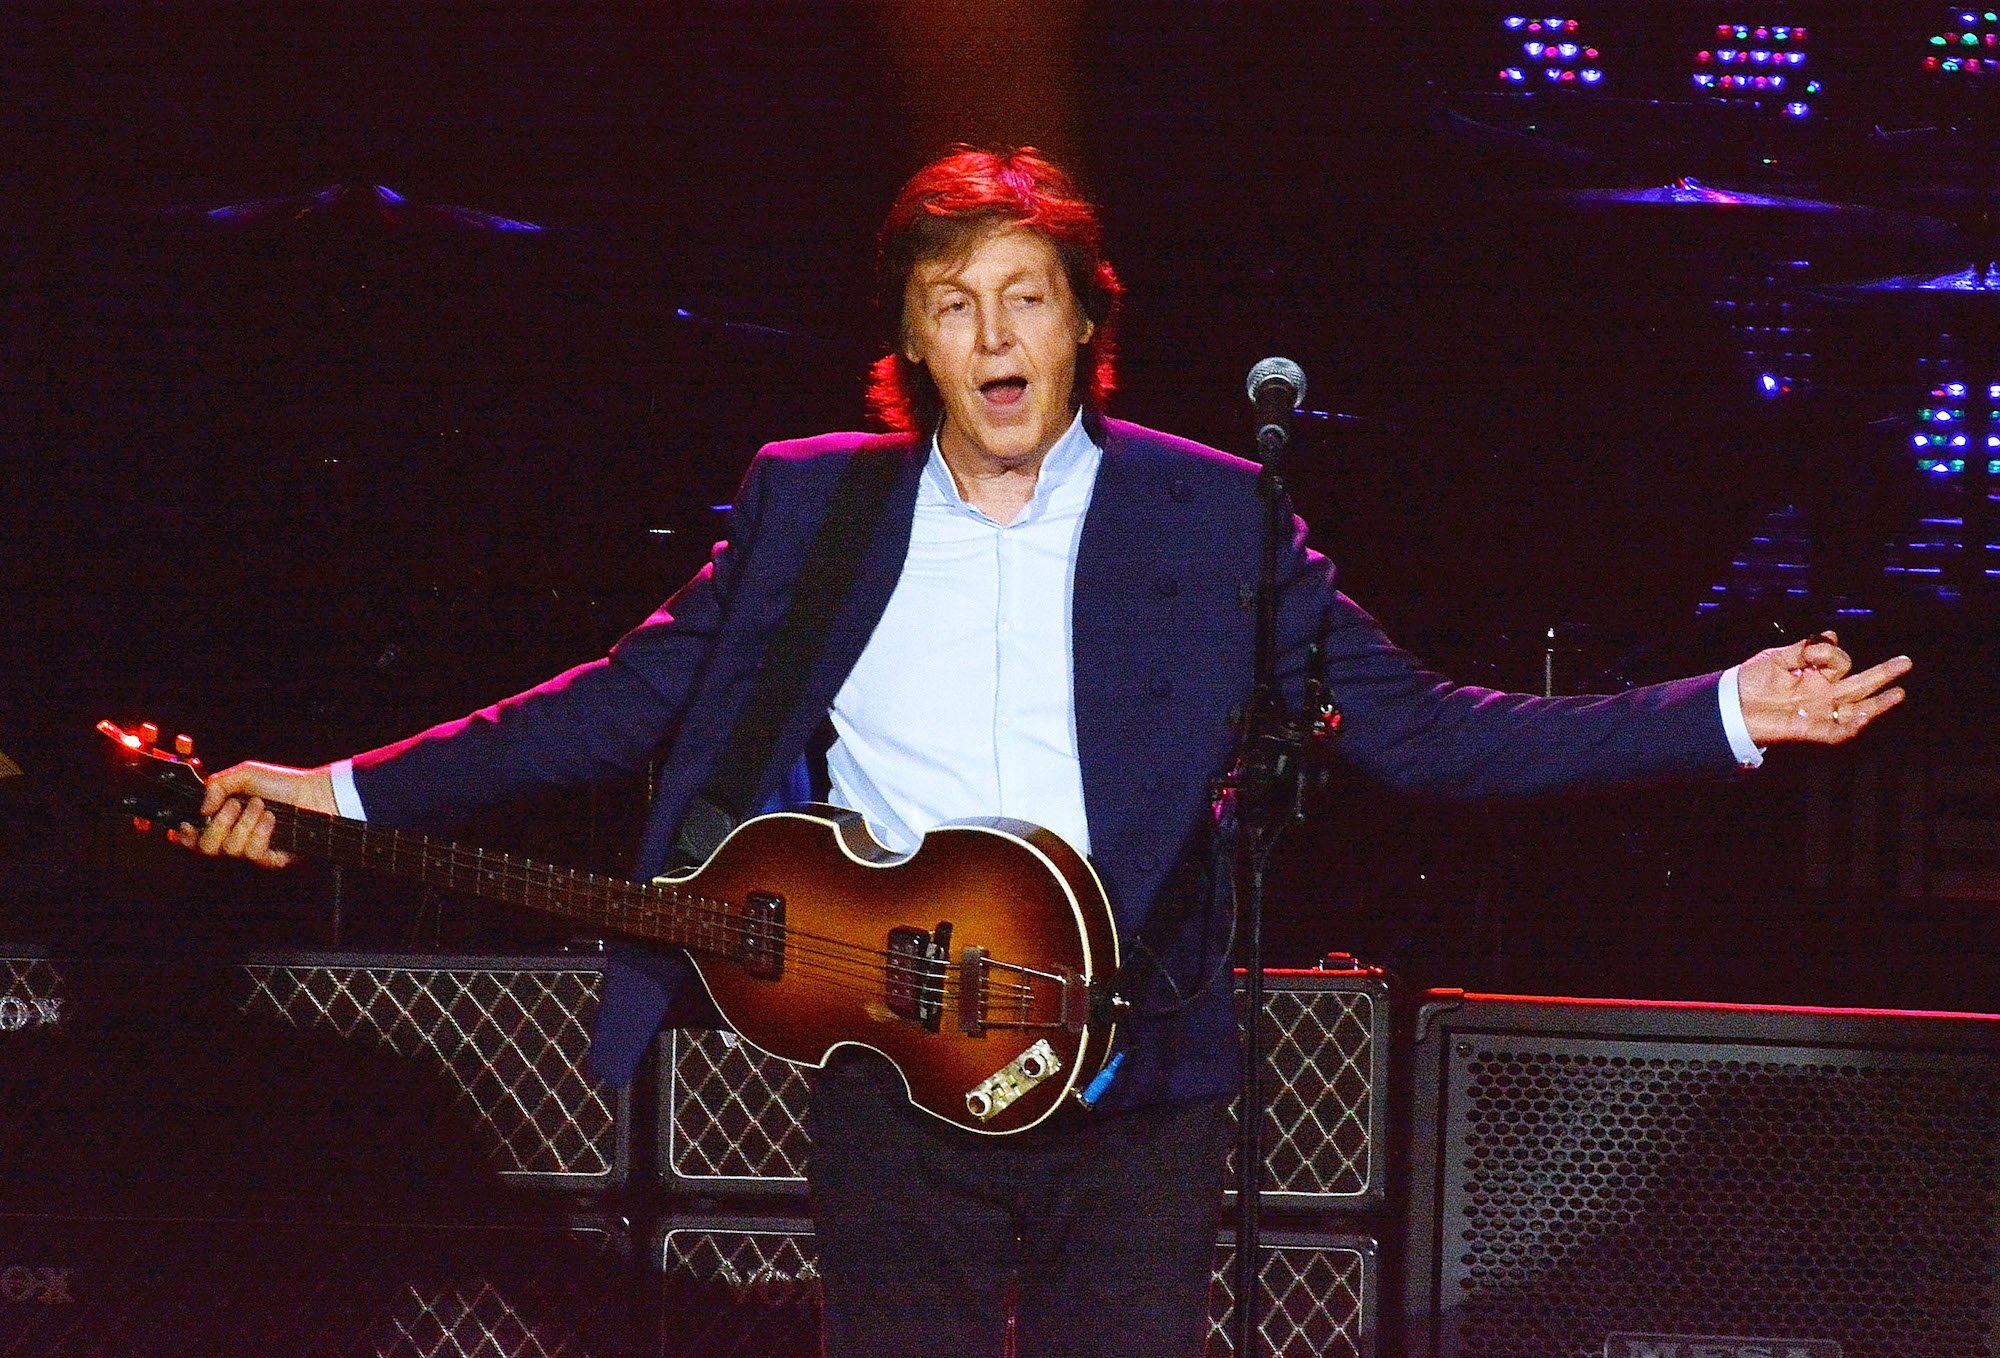 Paul McCartney performing at the O2 Arena in 2015 in London, England